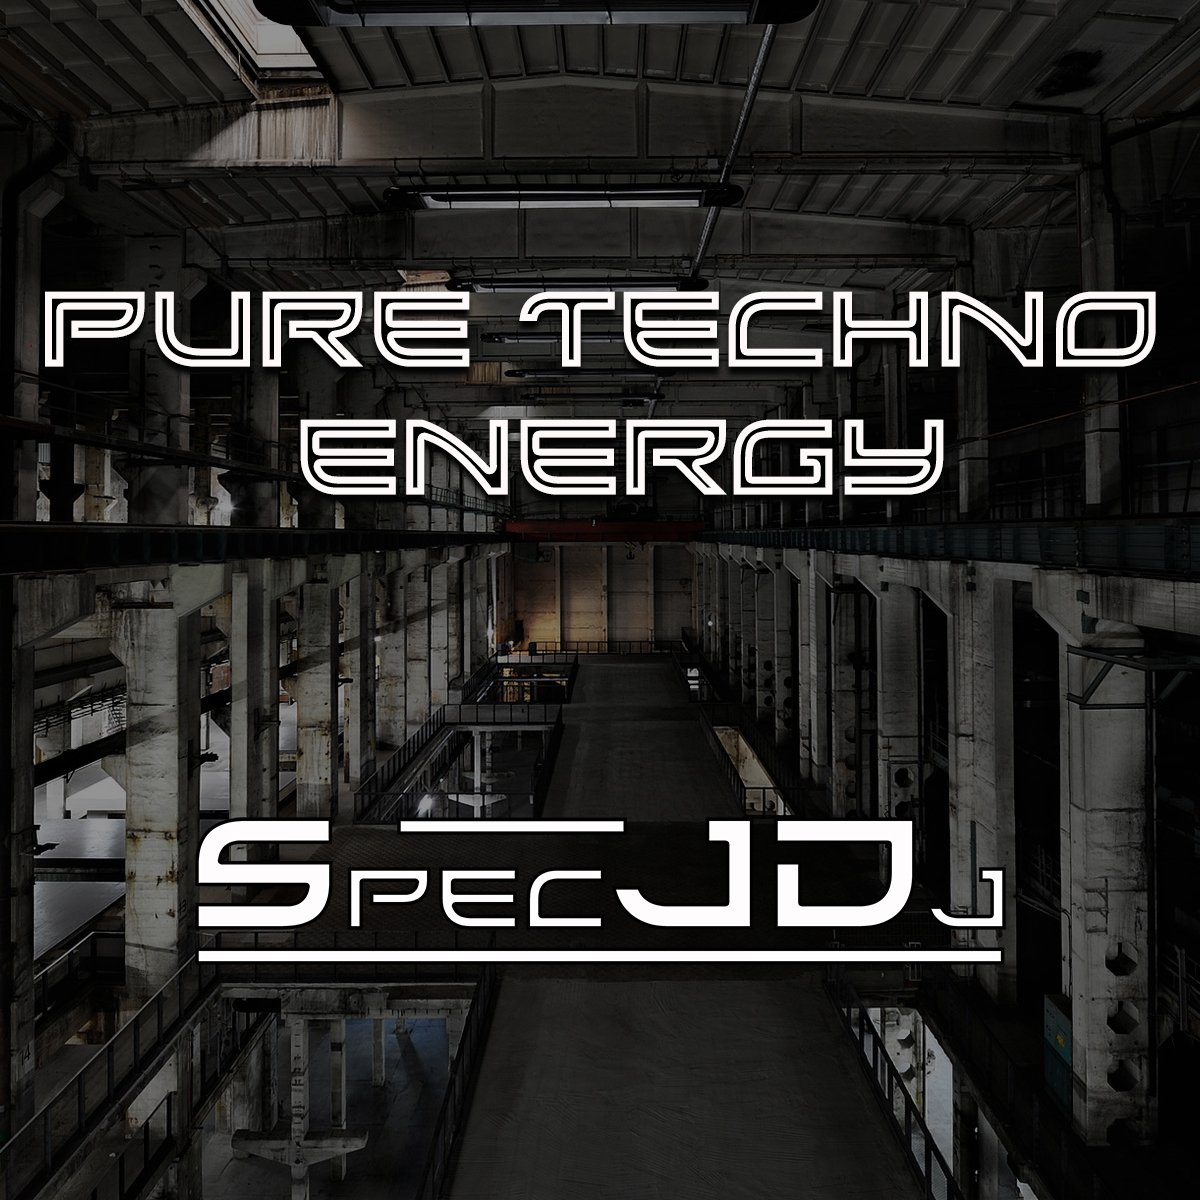 Pure Techno Energy :: Pure techno energy #8 by Spec J DJ (aired on August 3rd, 2018) banner logo